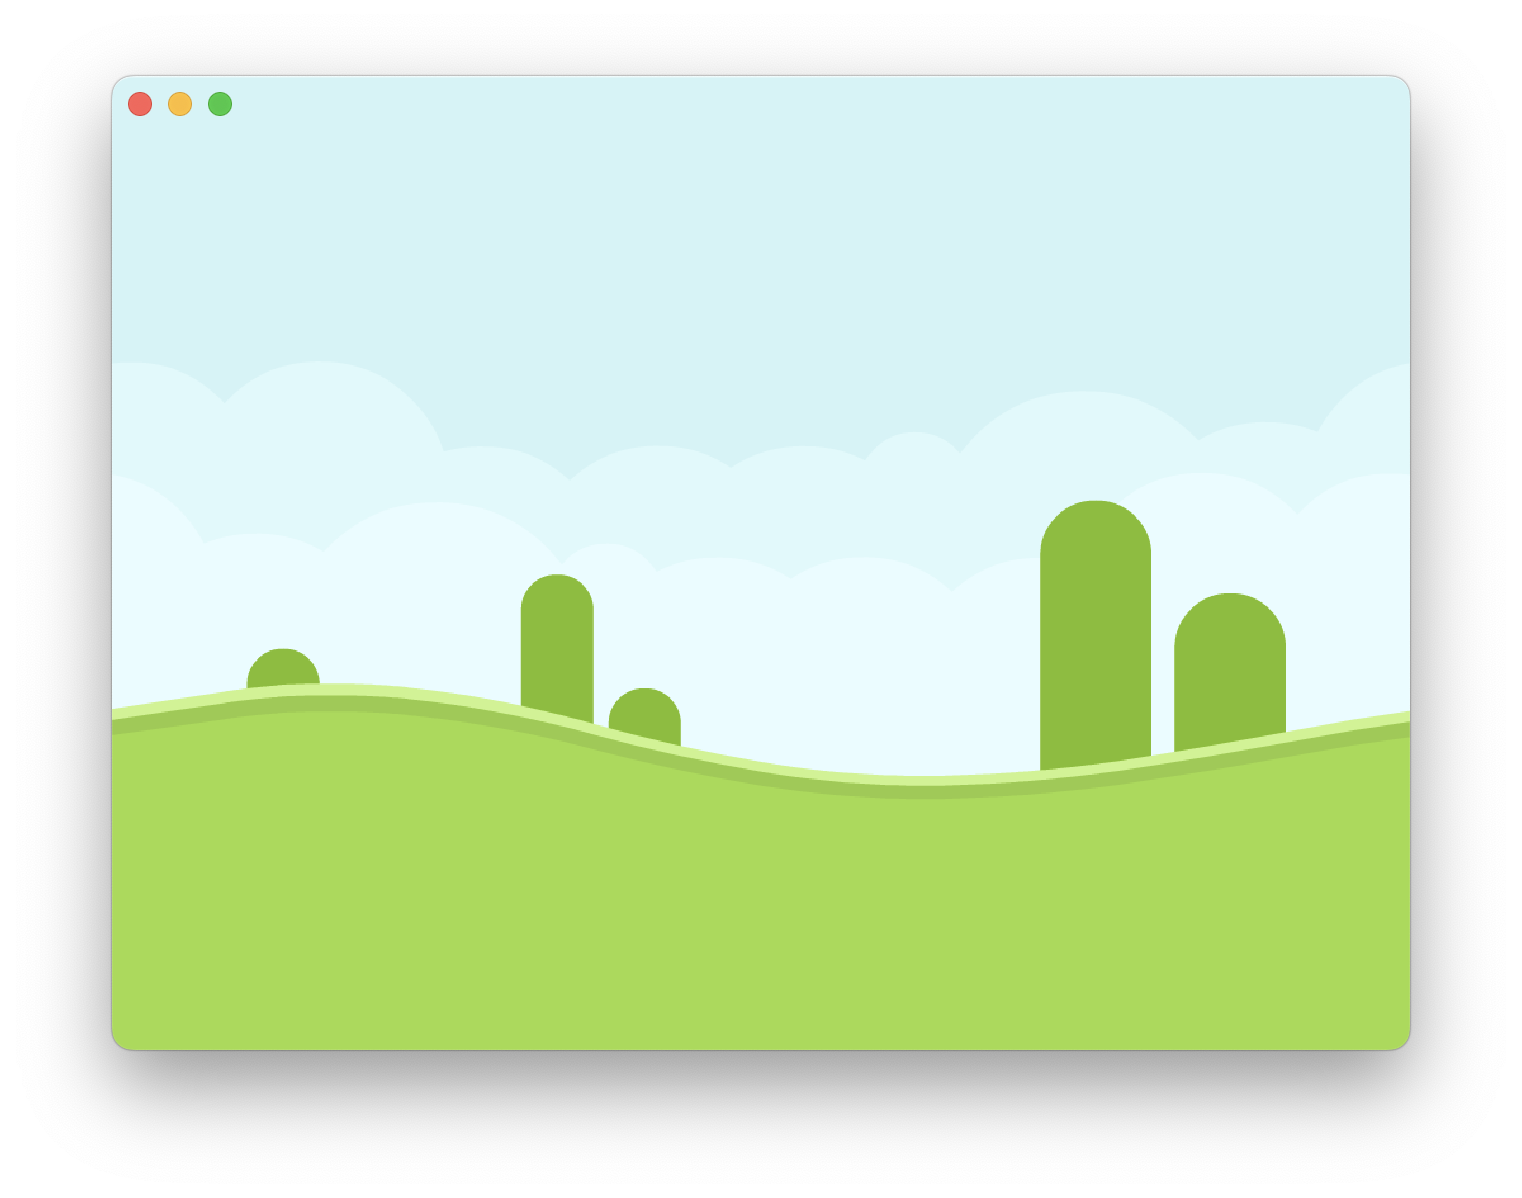 An app window with the background image of rolling green hills and oddly abstract trees.